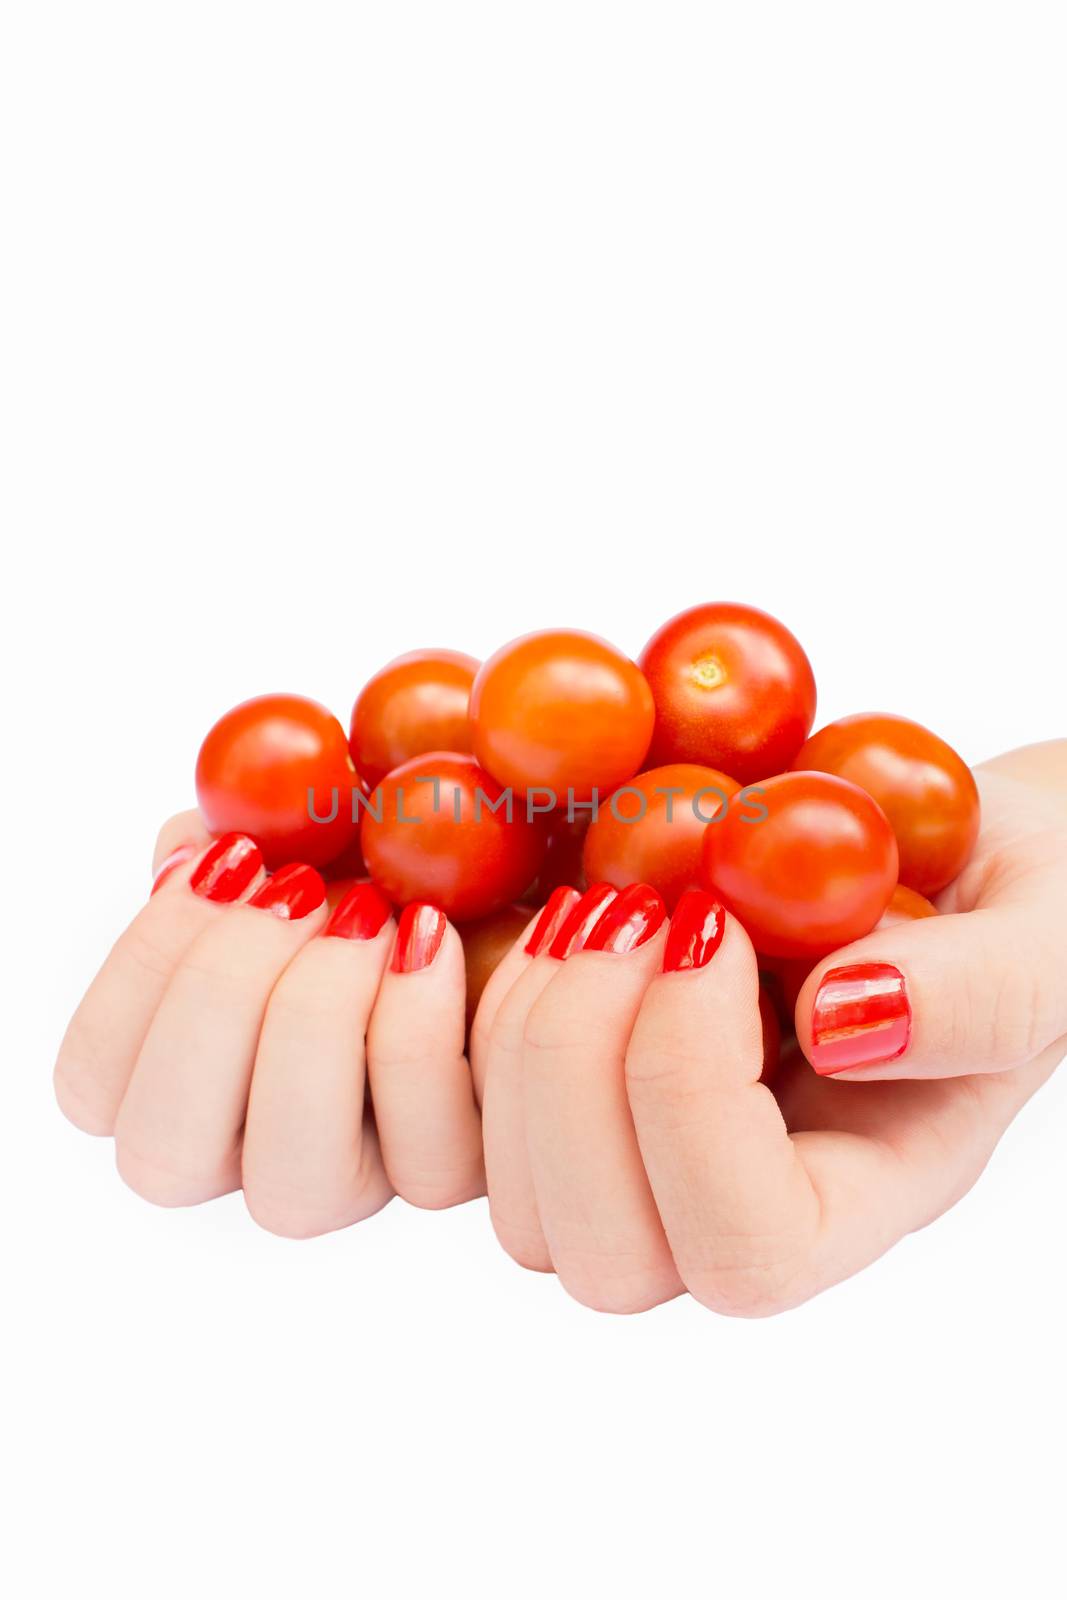 Two hands holding cherry tomatoes by BenSchonewille